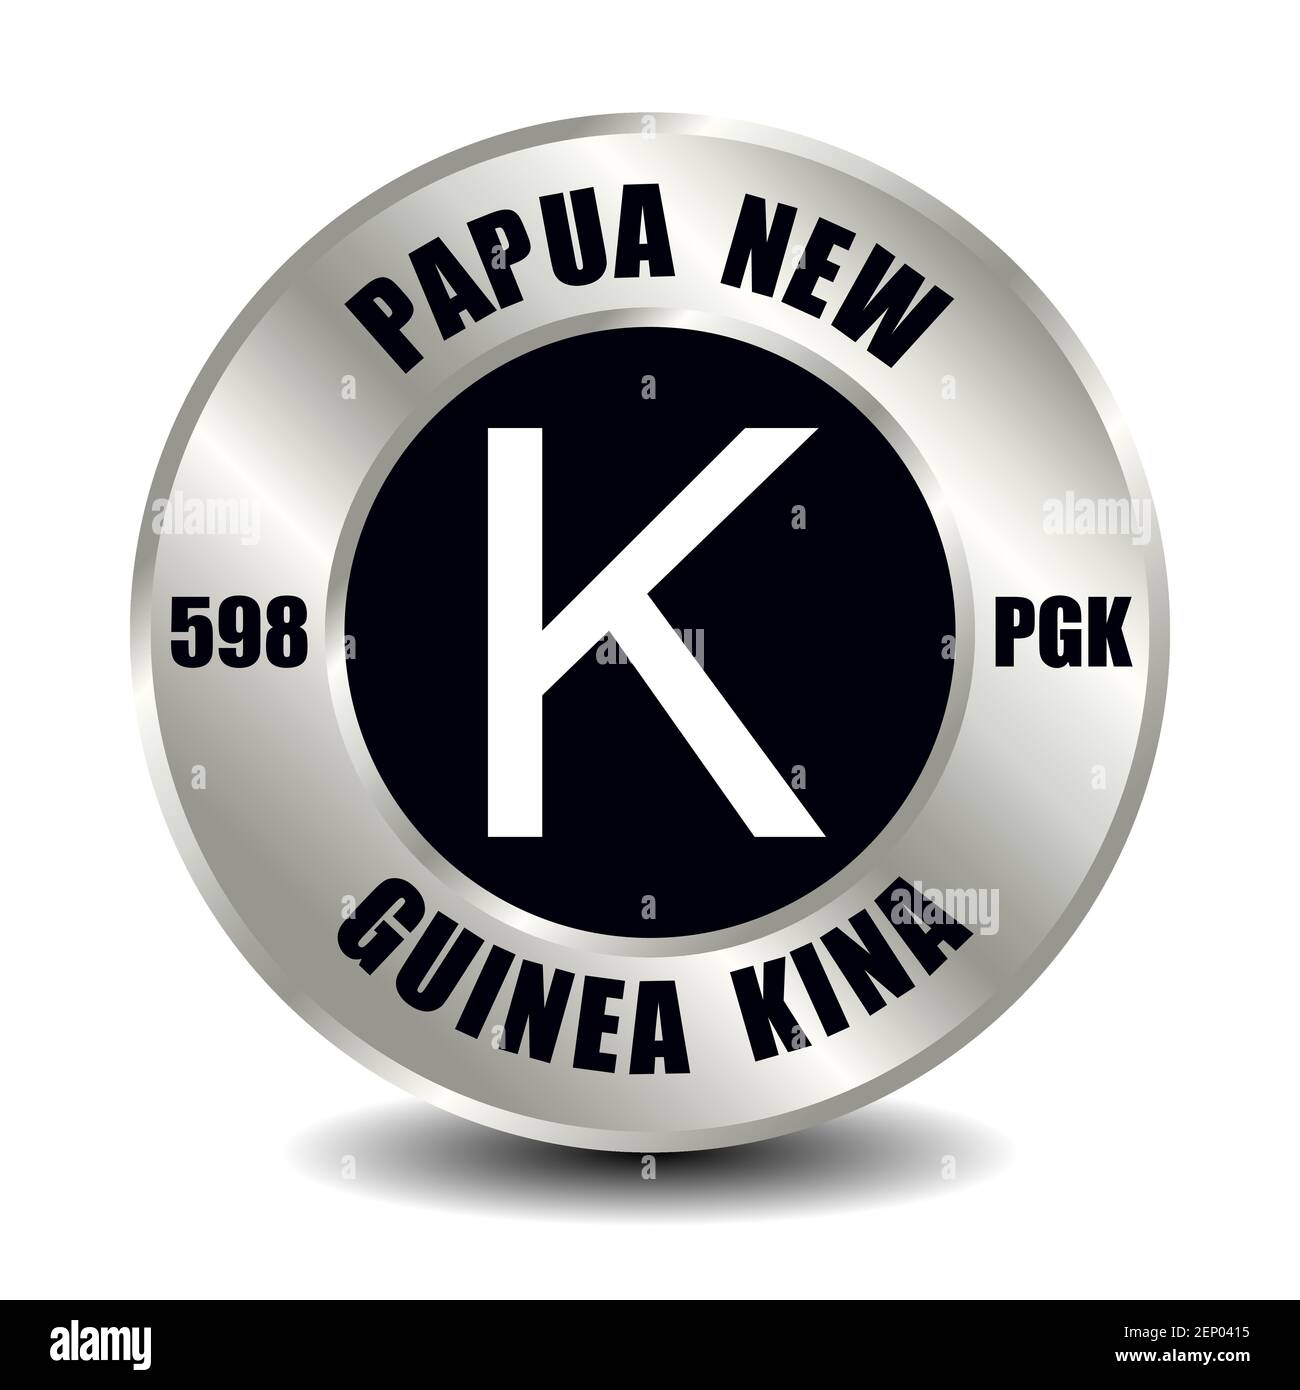 Papua New Guinea money icon isolated on round silver coin. Vector sign of currency symbol with international ISO code and abbreviation Stock Vector